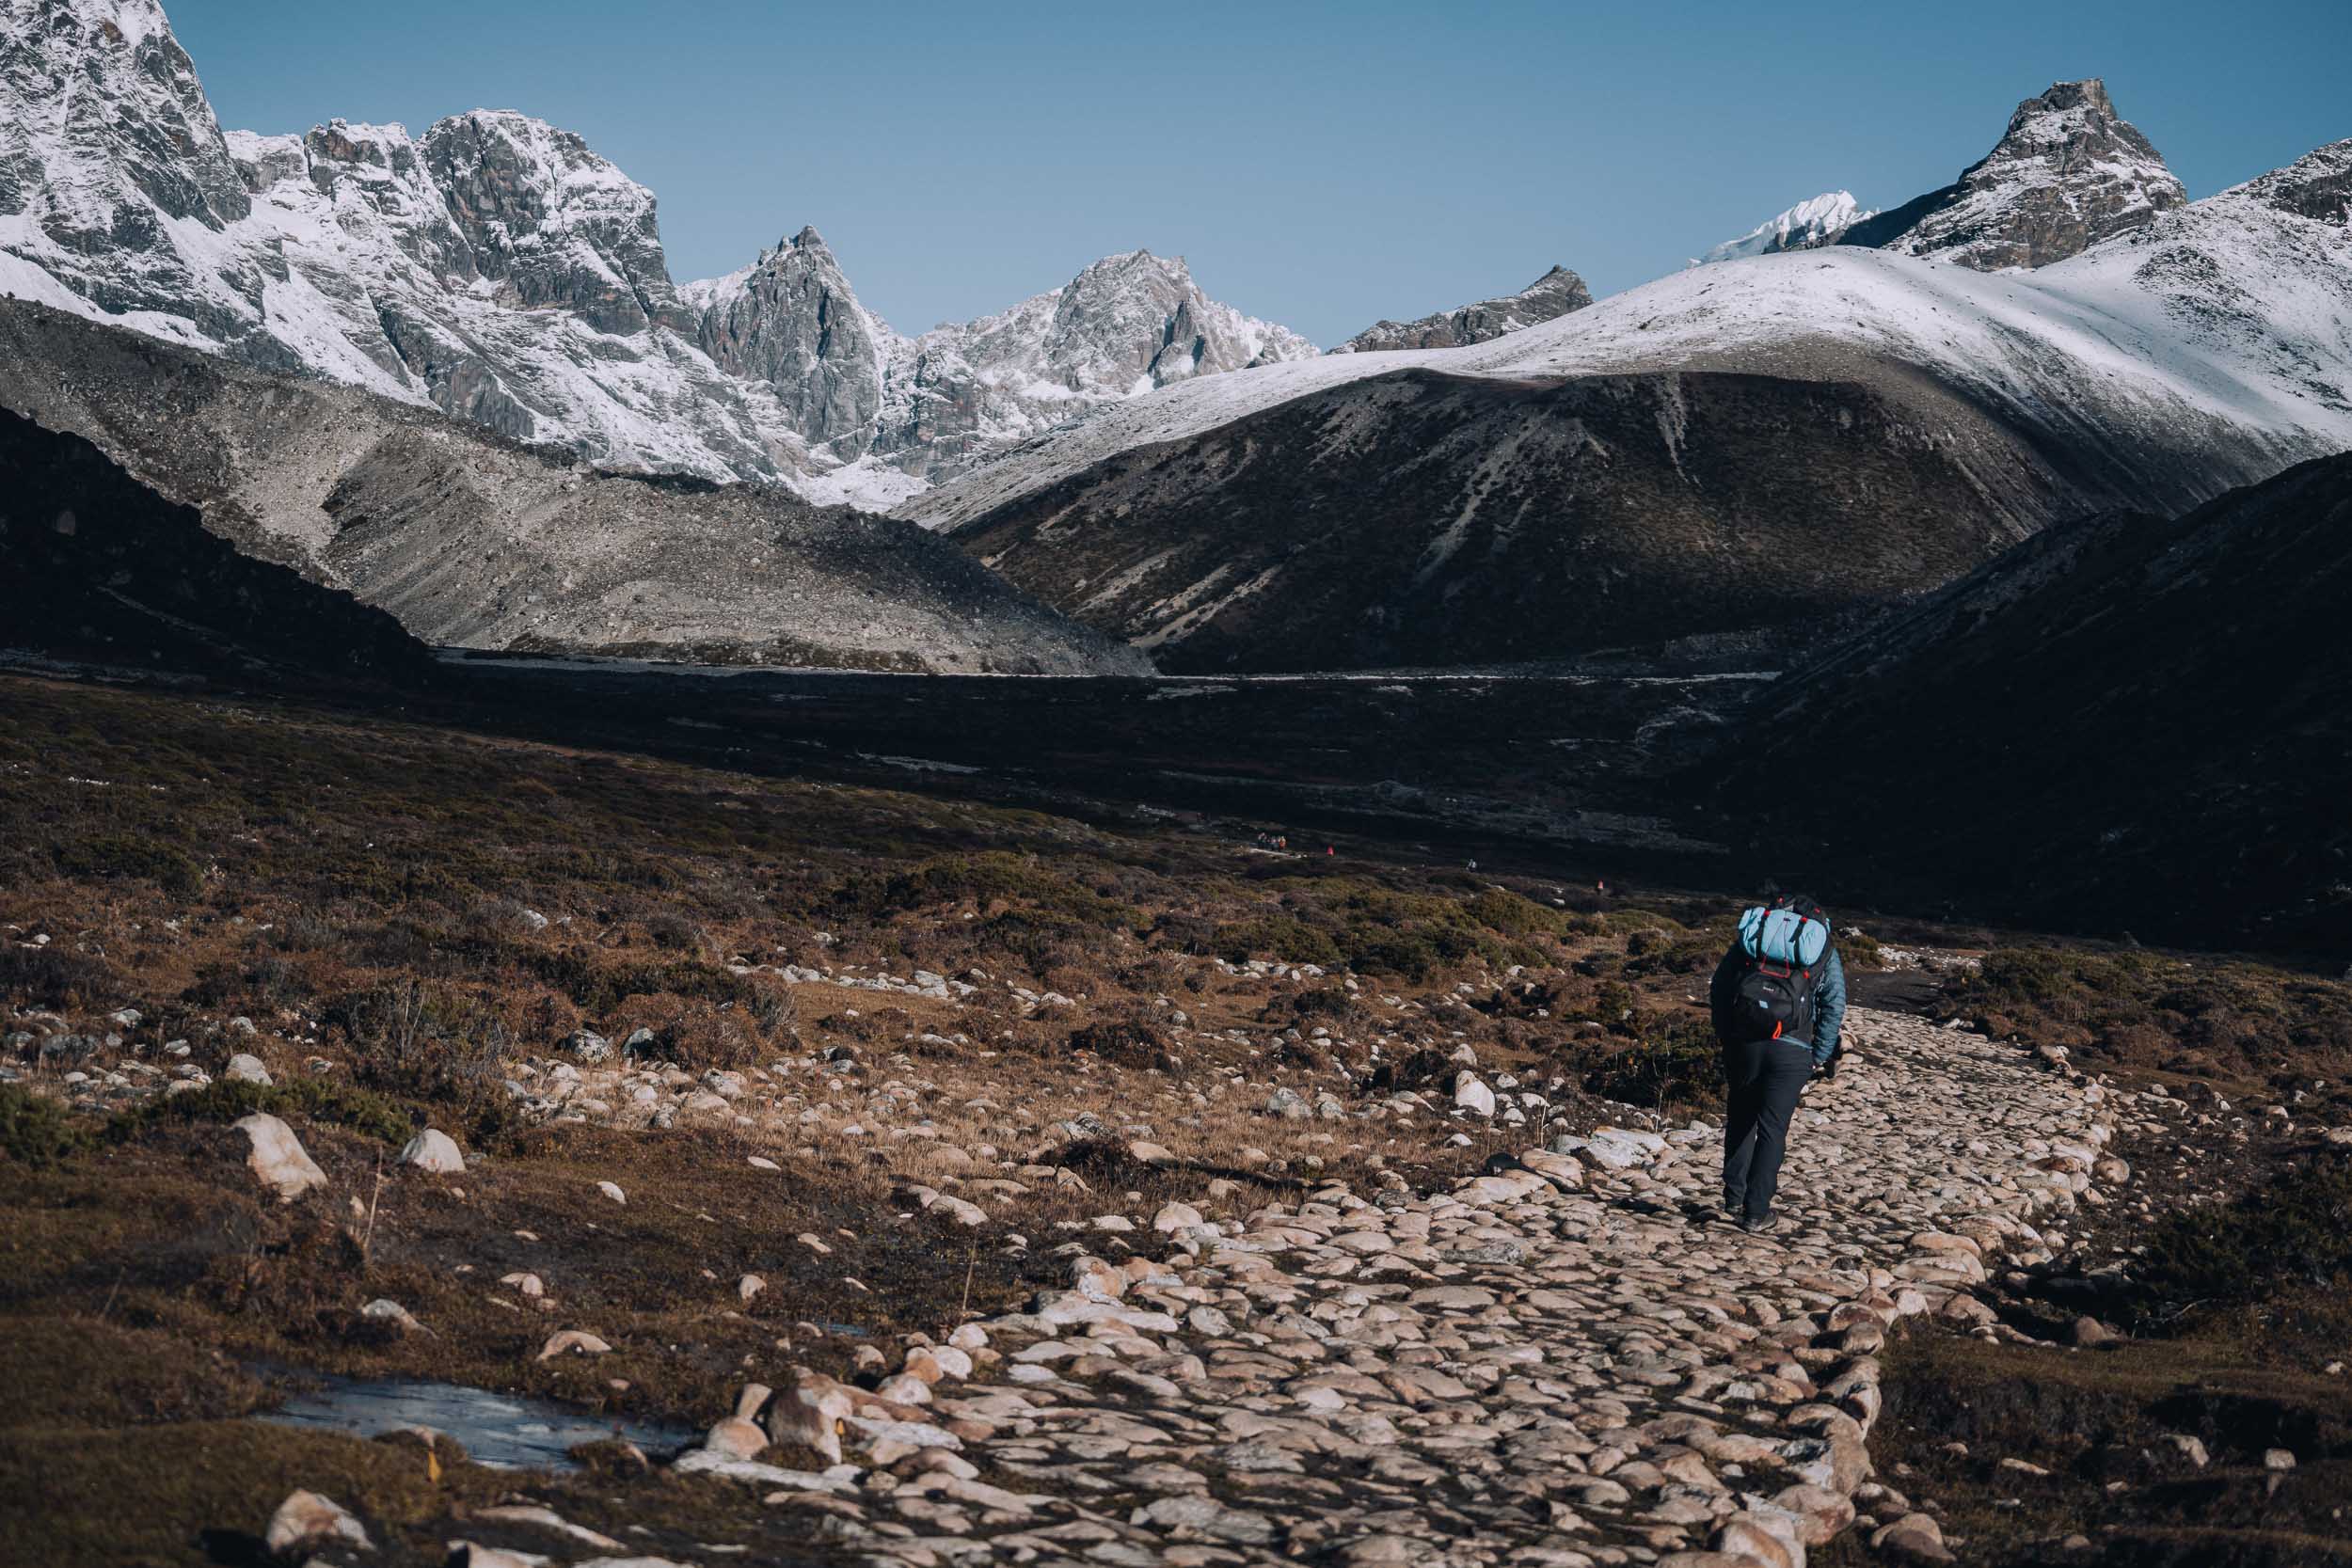 Walking the path in the khumbu valley